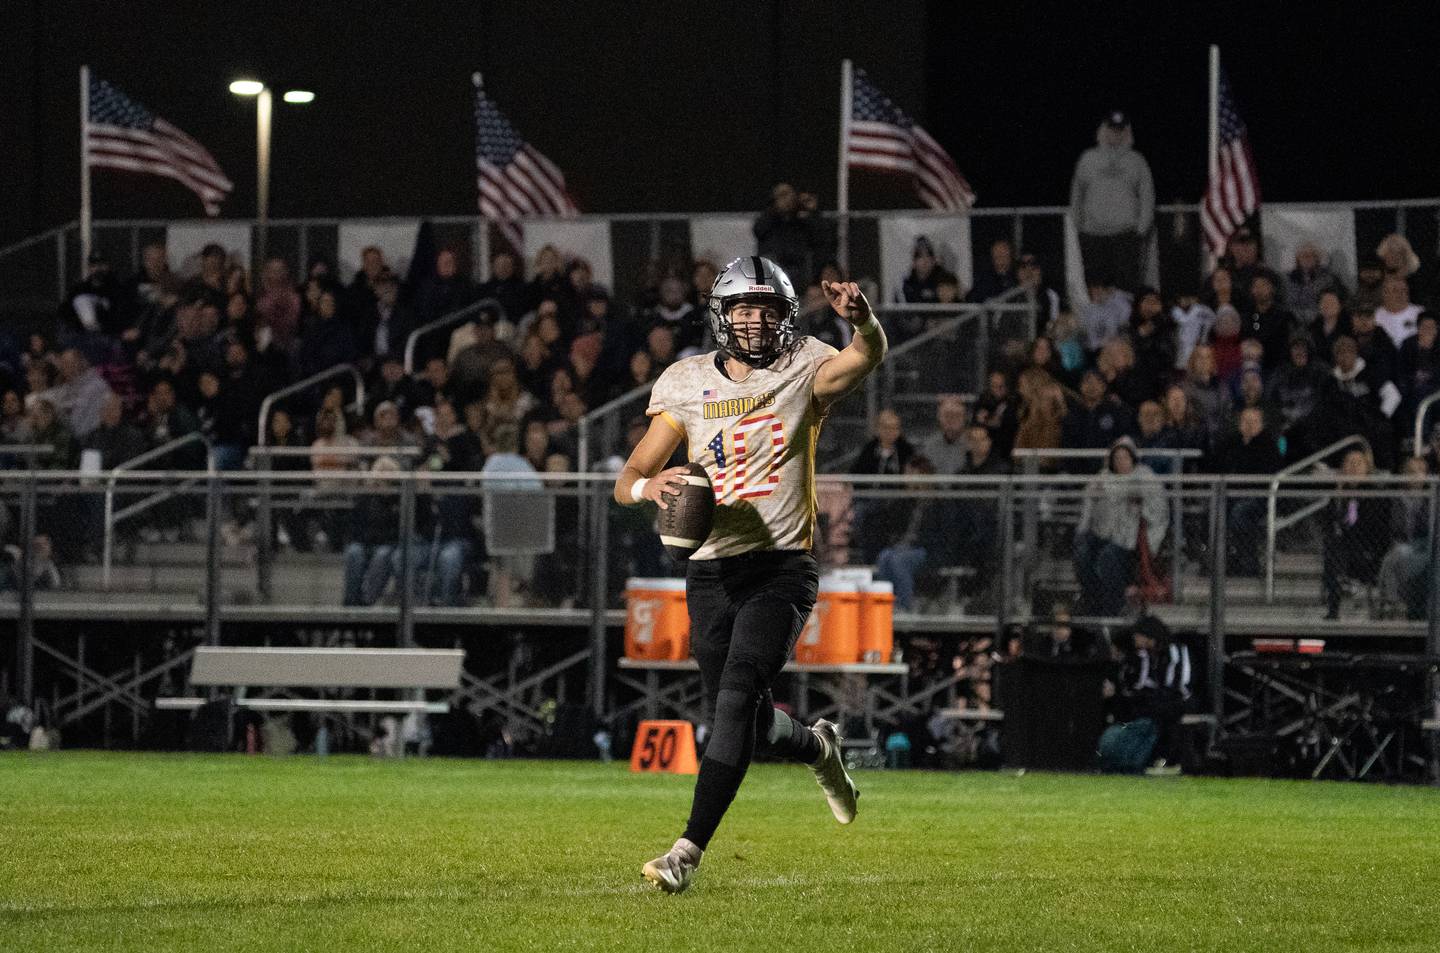 Kaneland’s Troyer Carlson (10) directs his offense while rolling out of the pocket against Sycamore during a football game at Kaneland High School in Maple Park on Friday, Sep 30, 2022.